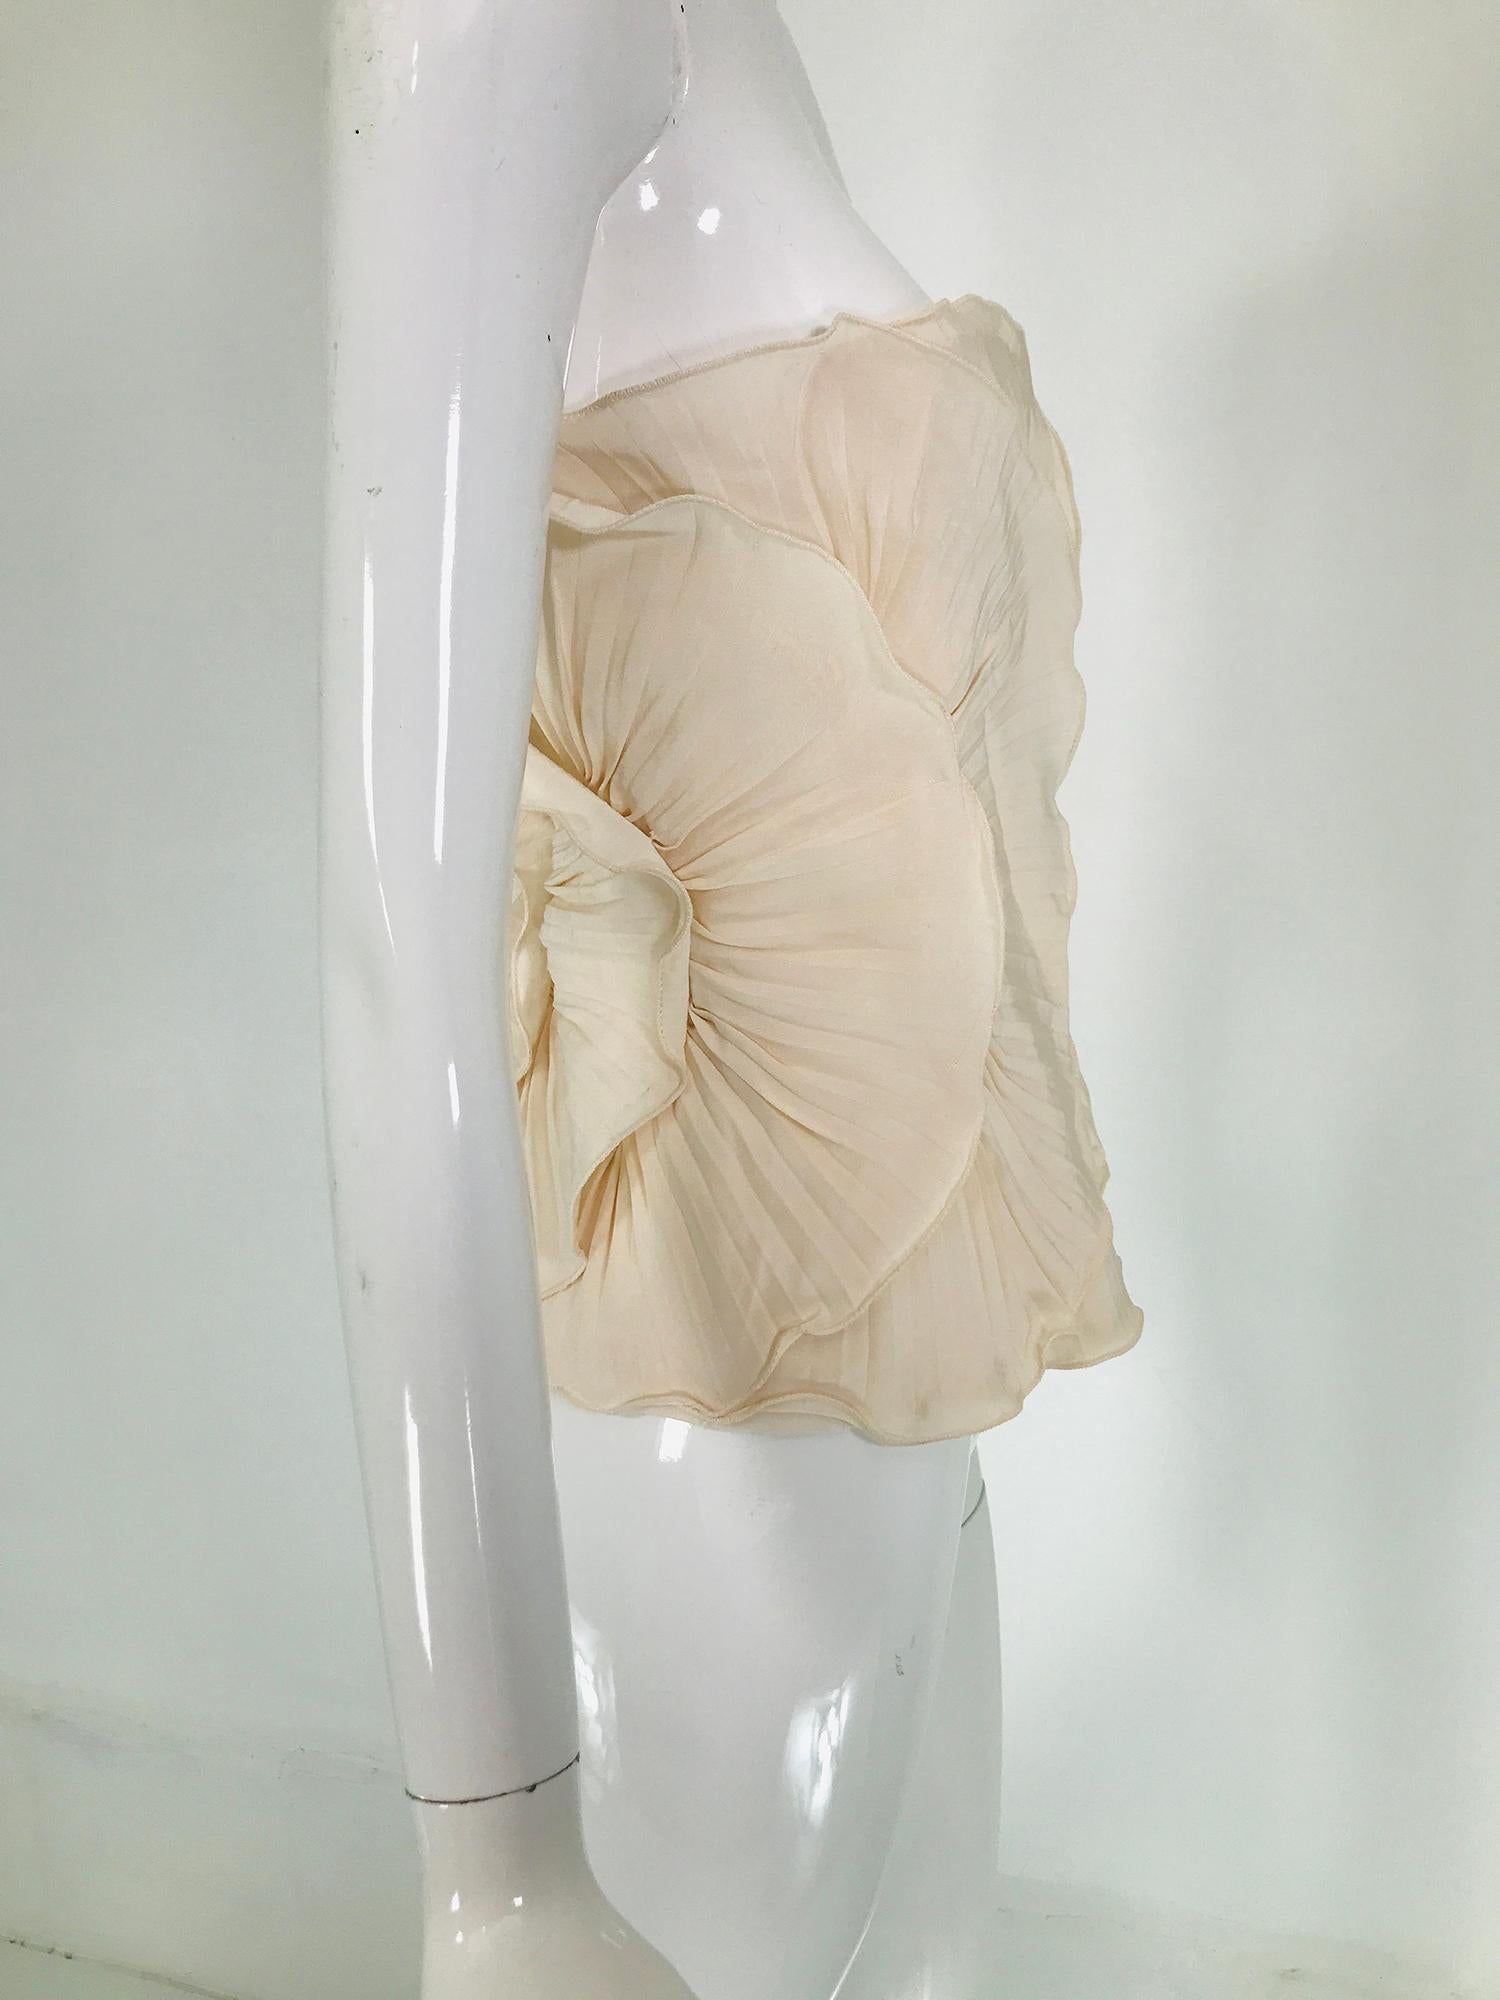 Mila Schon Ivory Bustier Plisse Silk 1980s unworn with tags size 40 For Sale 2